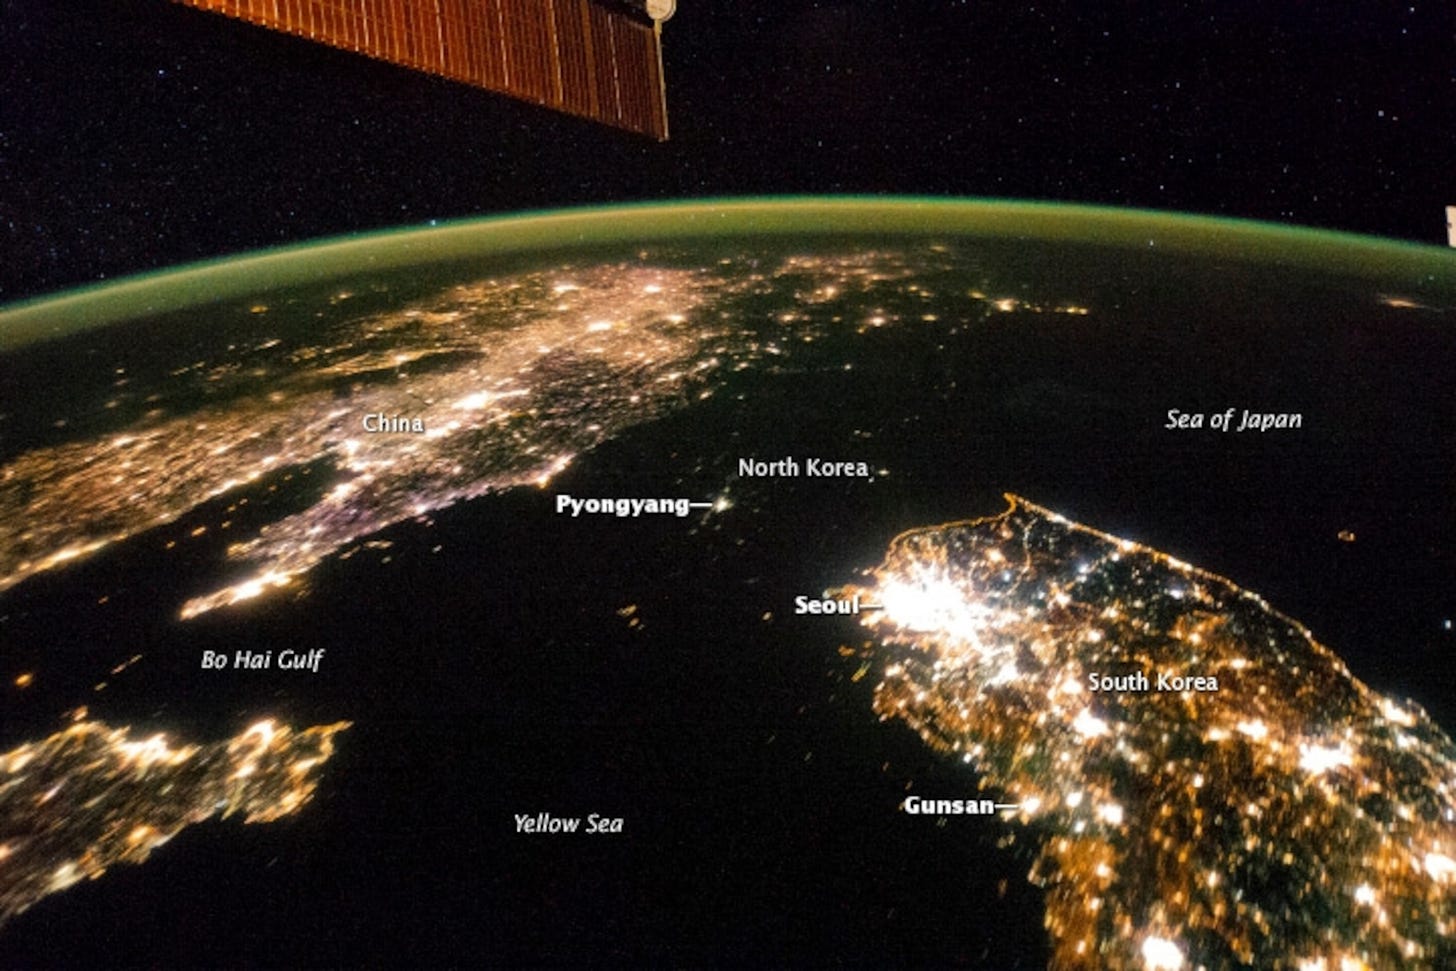 New Space Station Photos Show North Korea at Night, Cloaked in Darkness